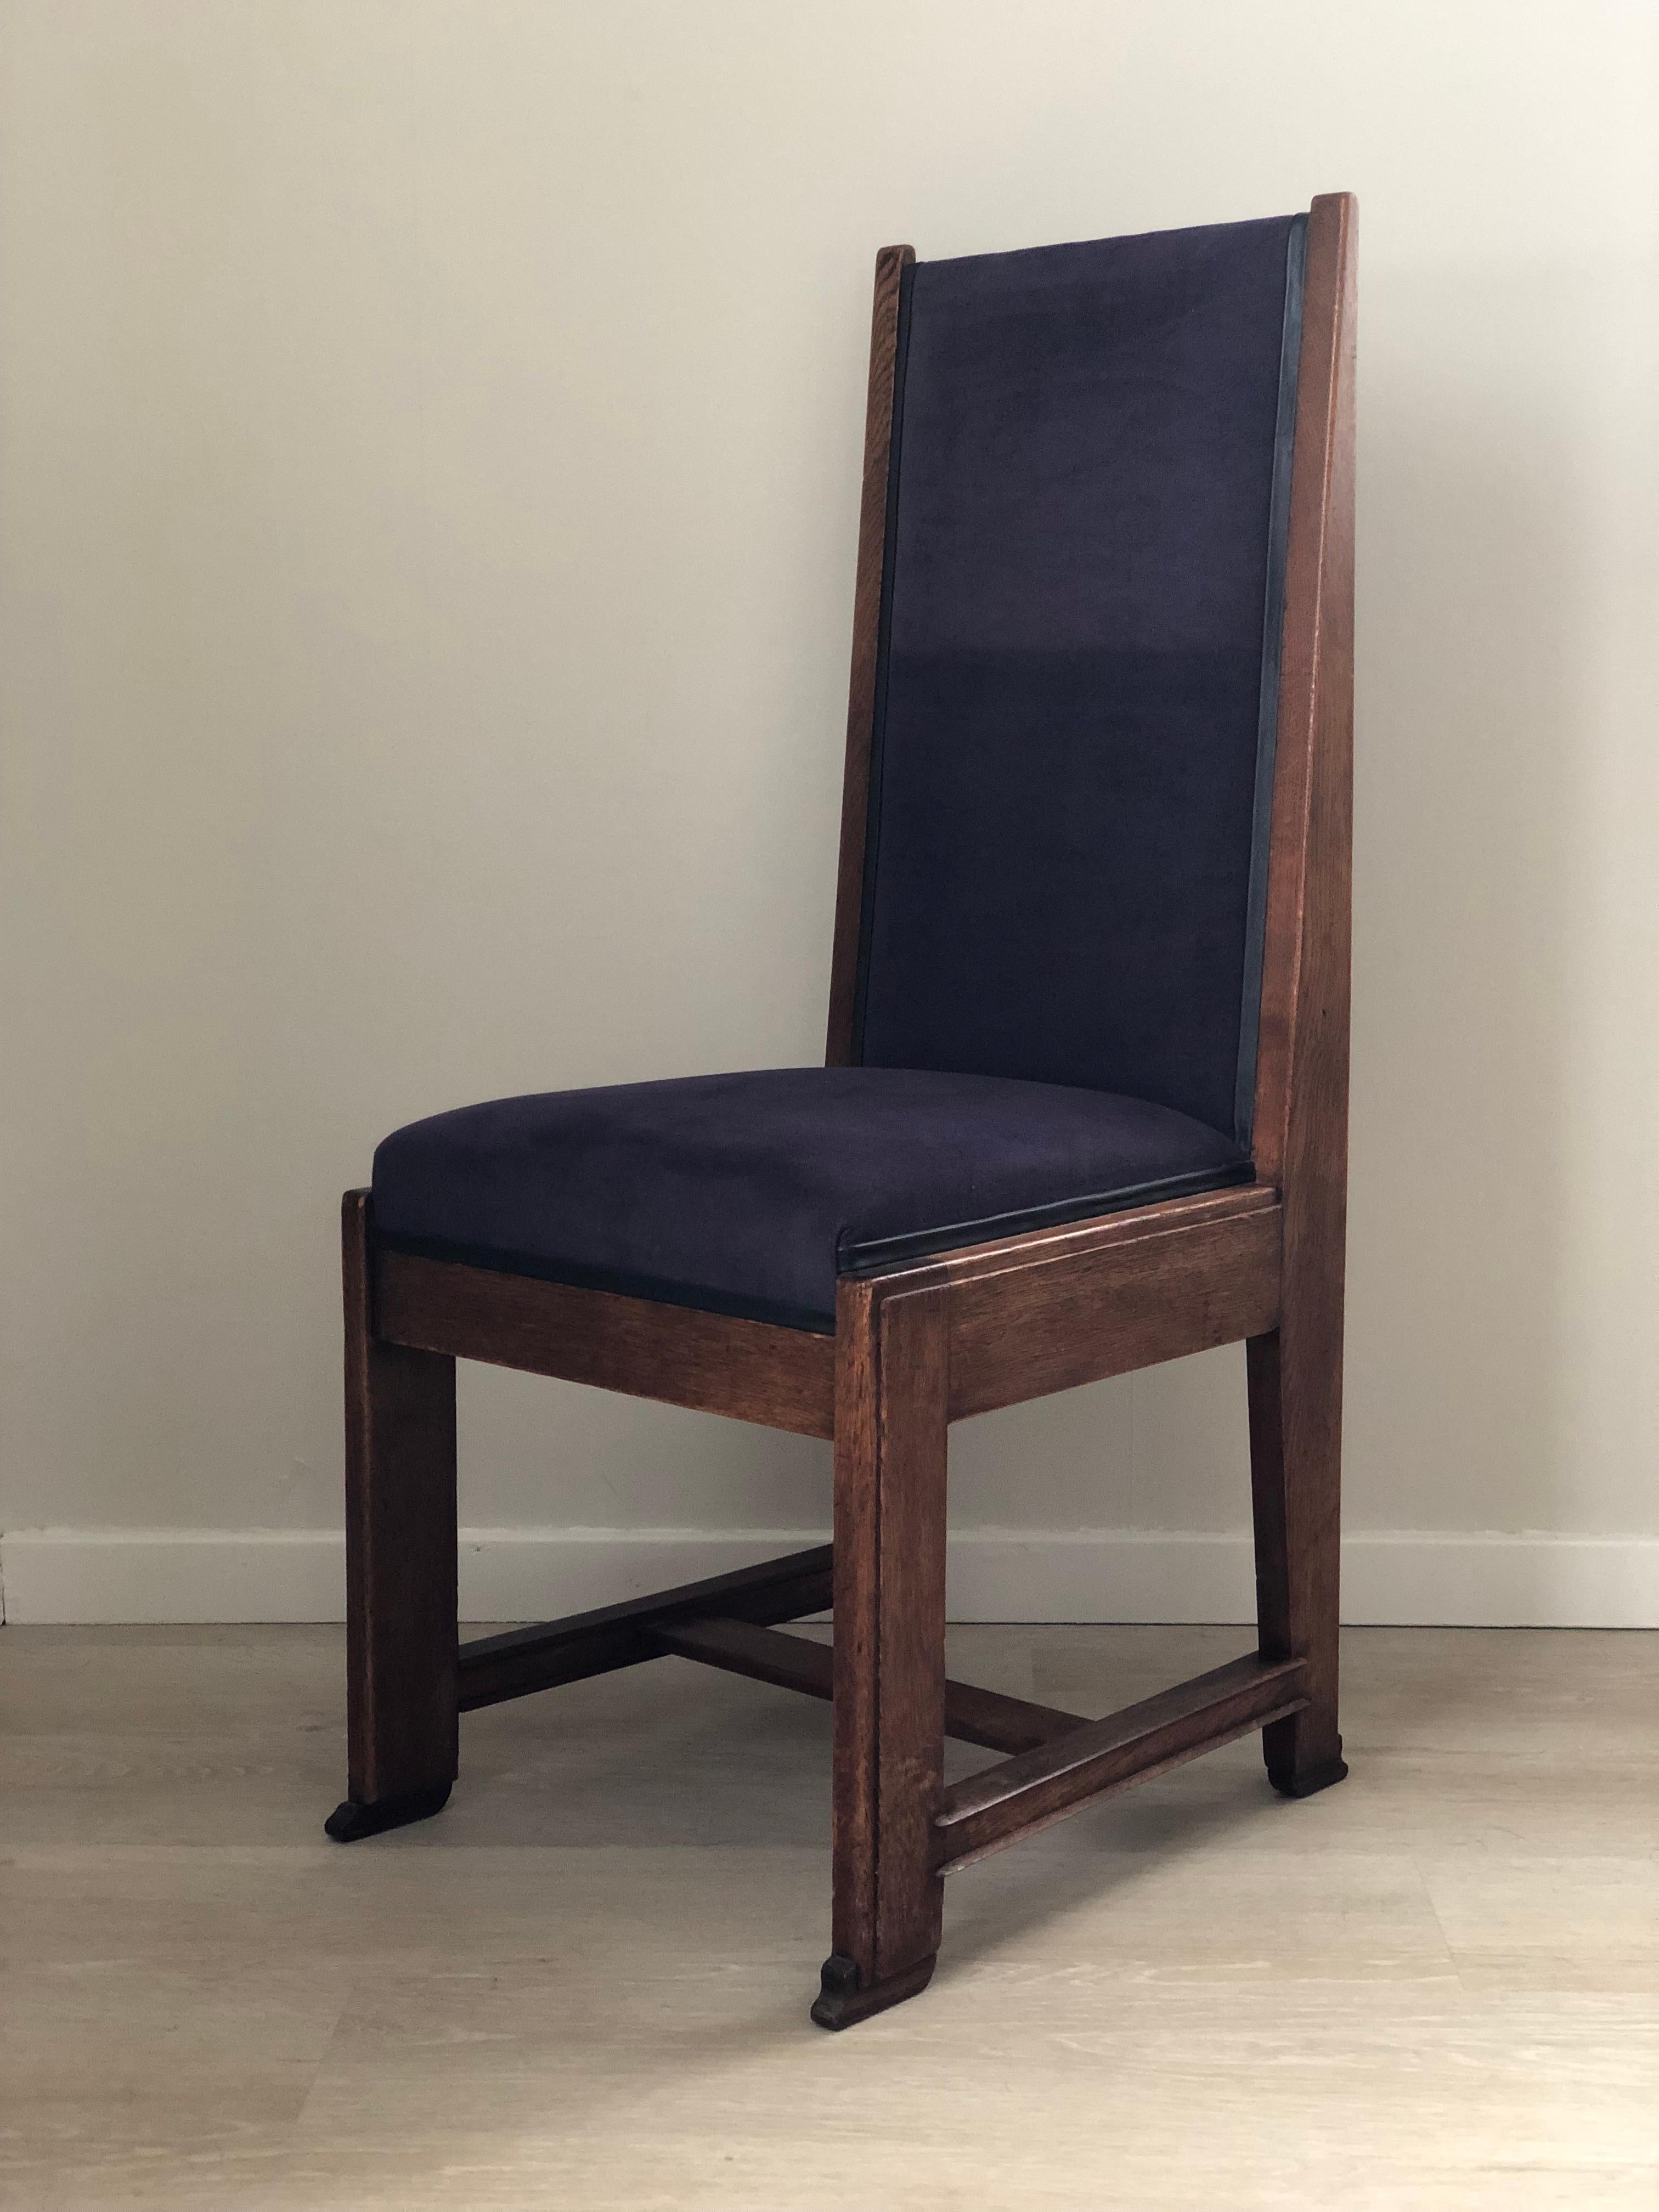 Art Deco design dining chairs from The Netherlands. Frits Spanjaard for 'The Hague School' 1930s. The 4 high-quality chairs with a high back have beautiful features, have been carved and re-waxed. The purple fabric of the seat and back is from a